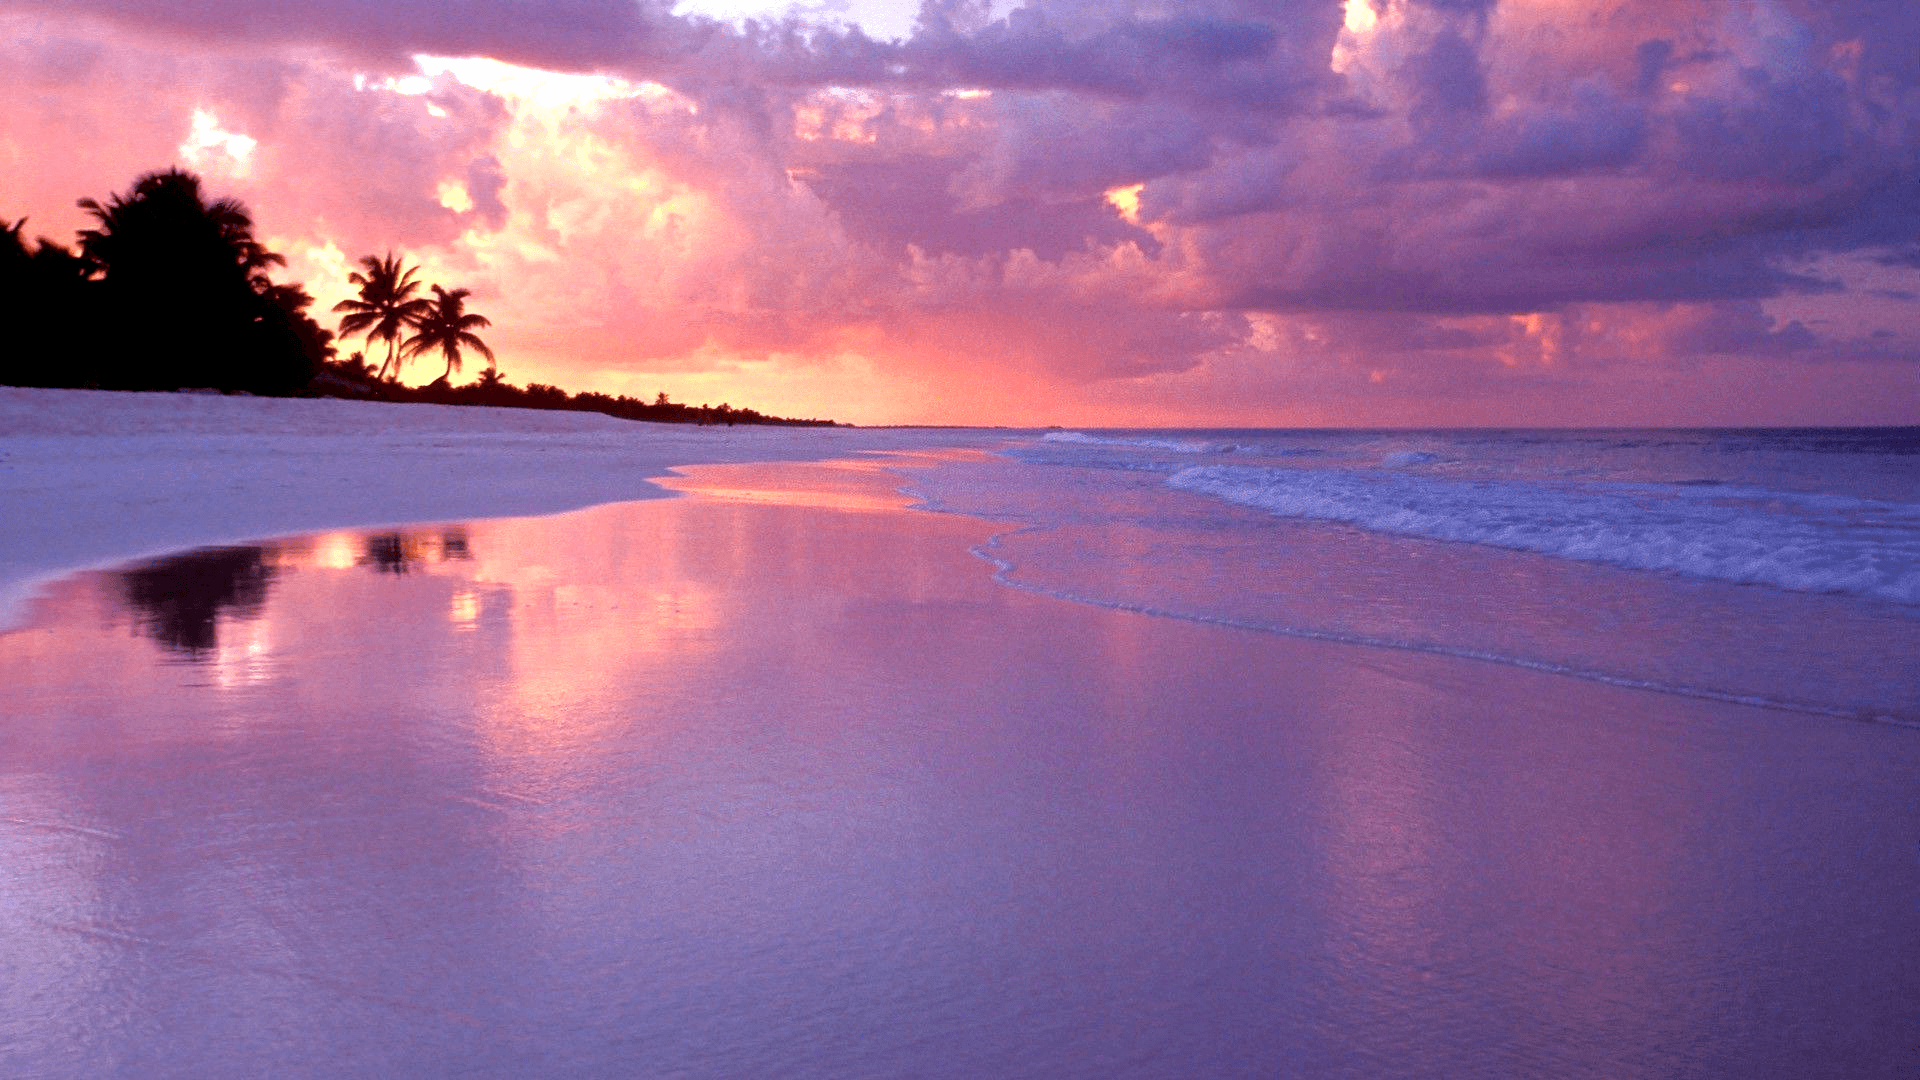 Beaches Sunset Wallpapers 4k Hd Beaches Sunset Backgrounds On